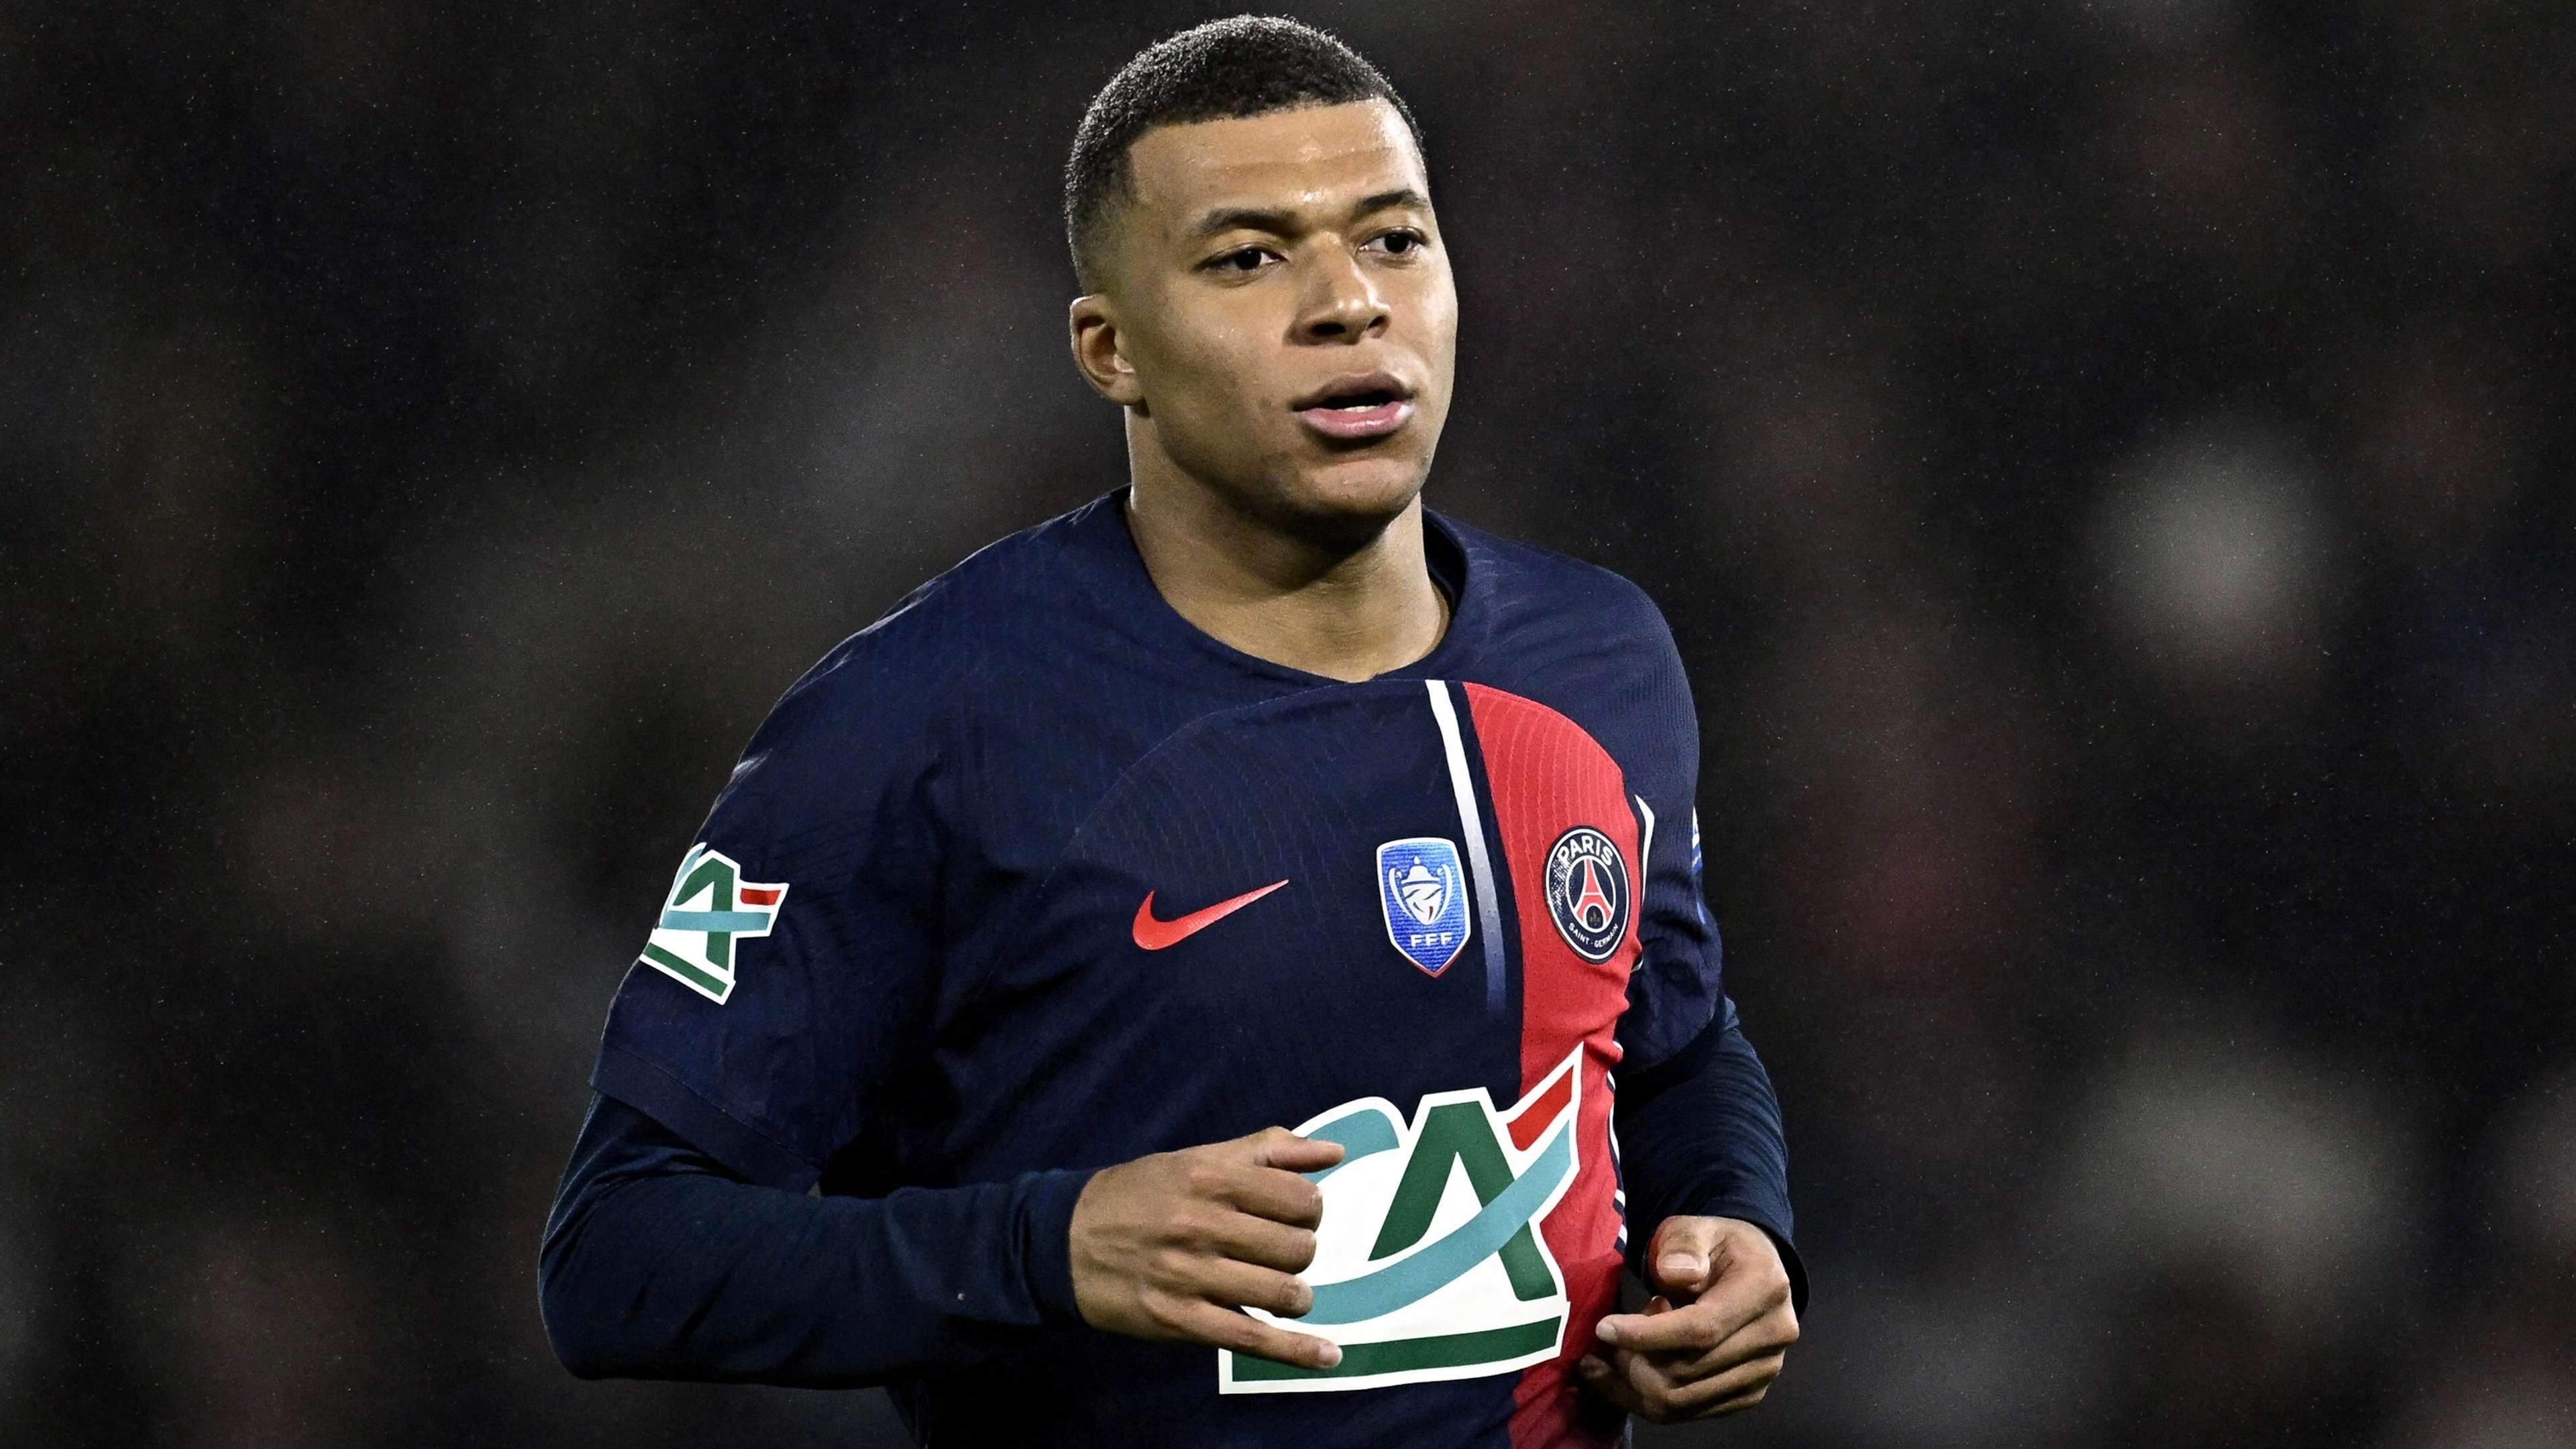 Mbappe Said He Is Completely Satisfied With Last Season